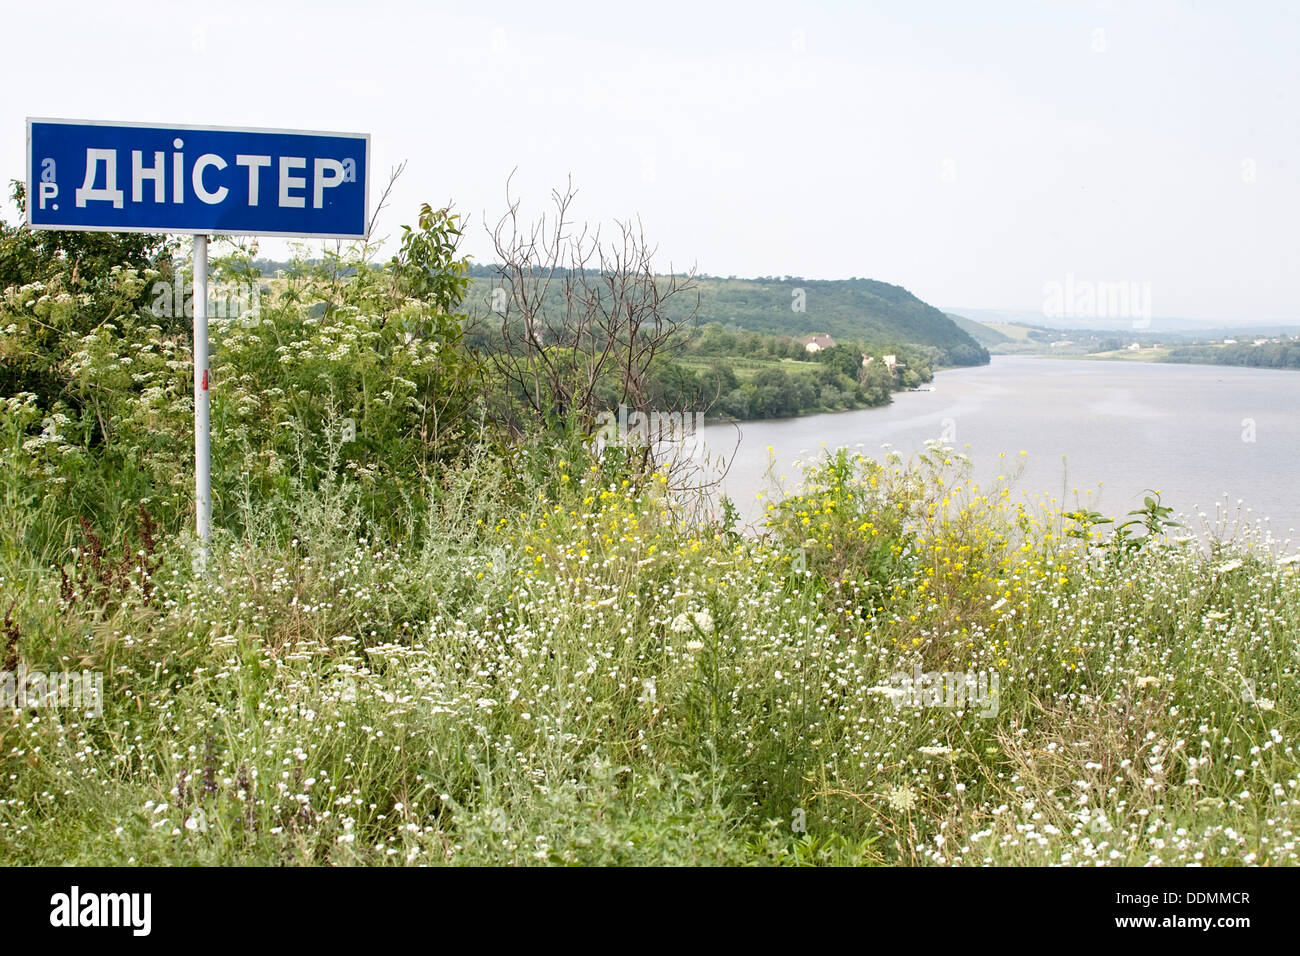 Dniester river signboard on real nature background, Ukraine Stock Photo